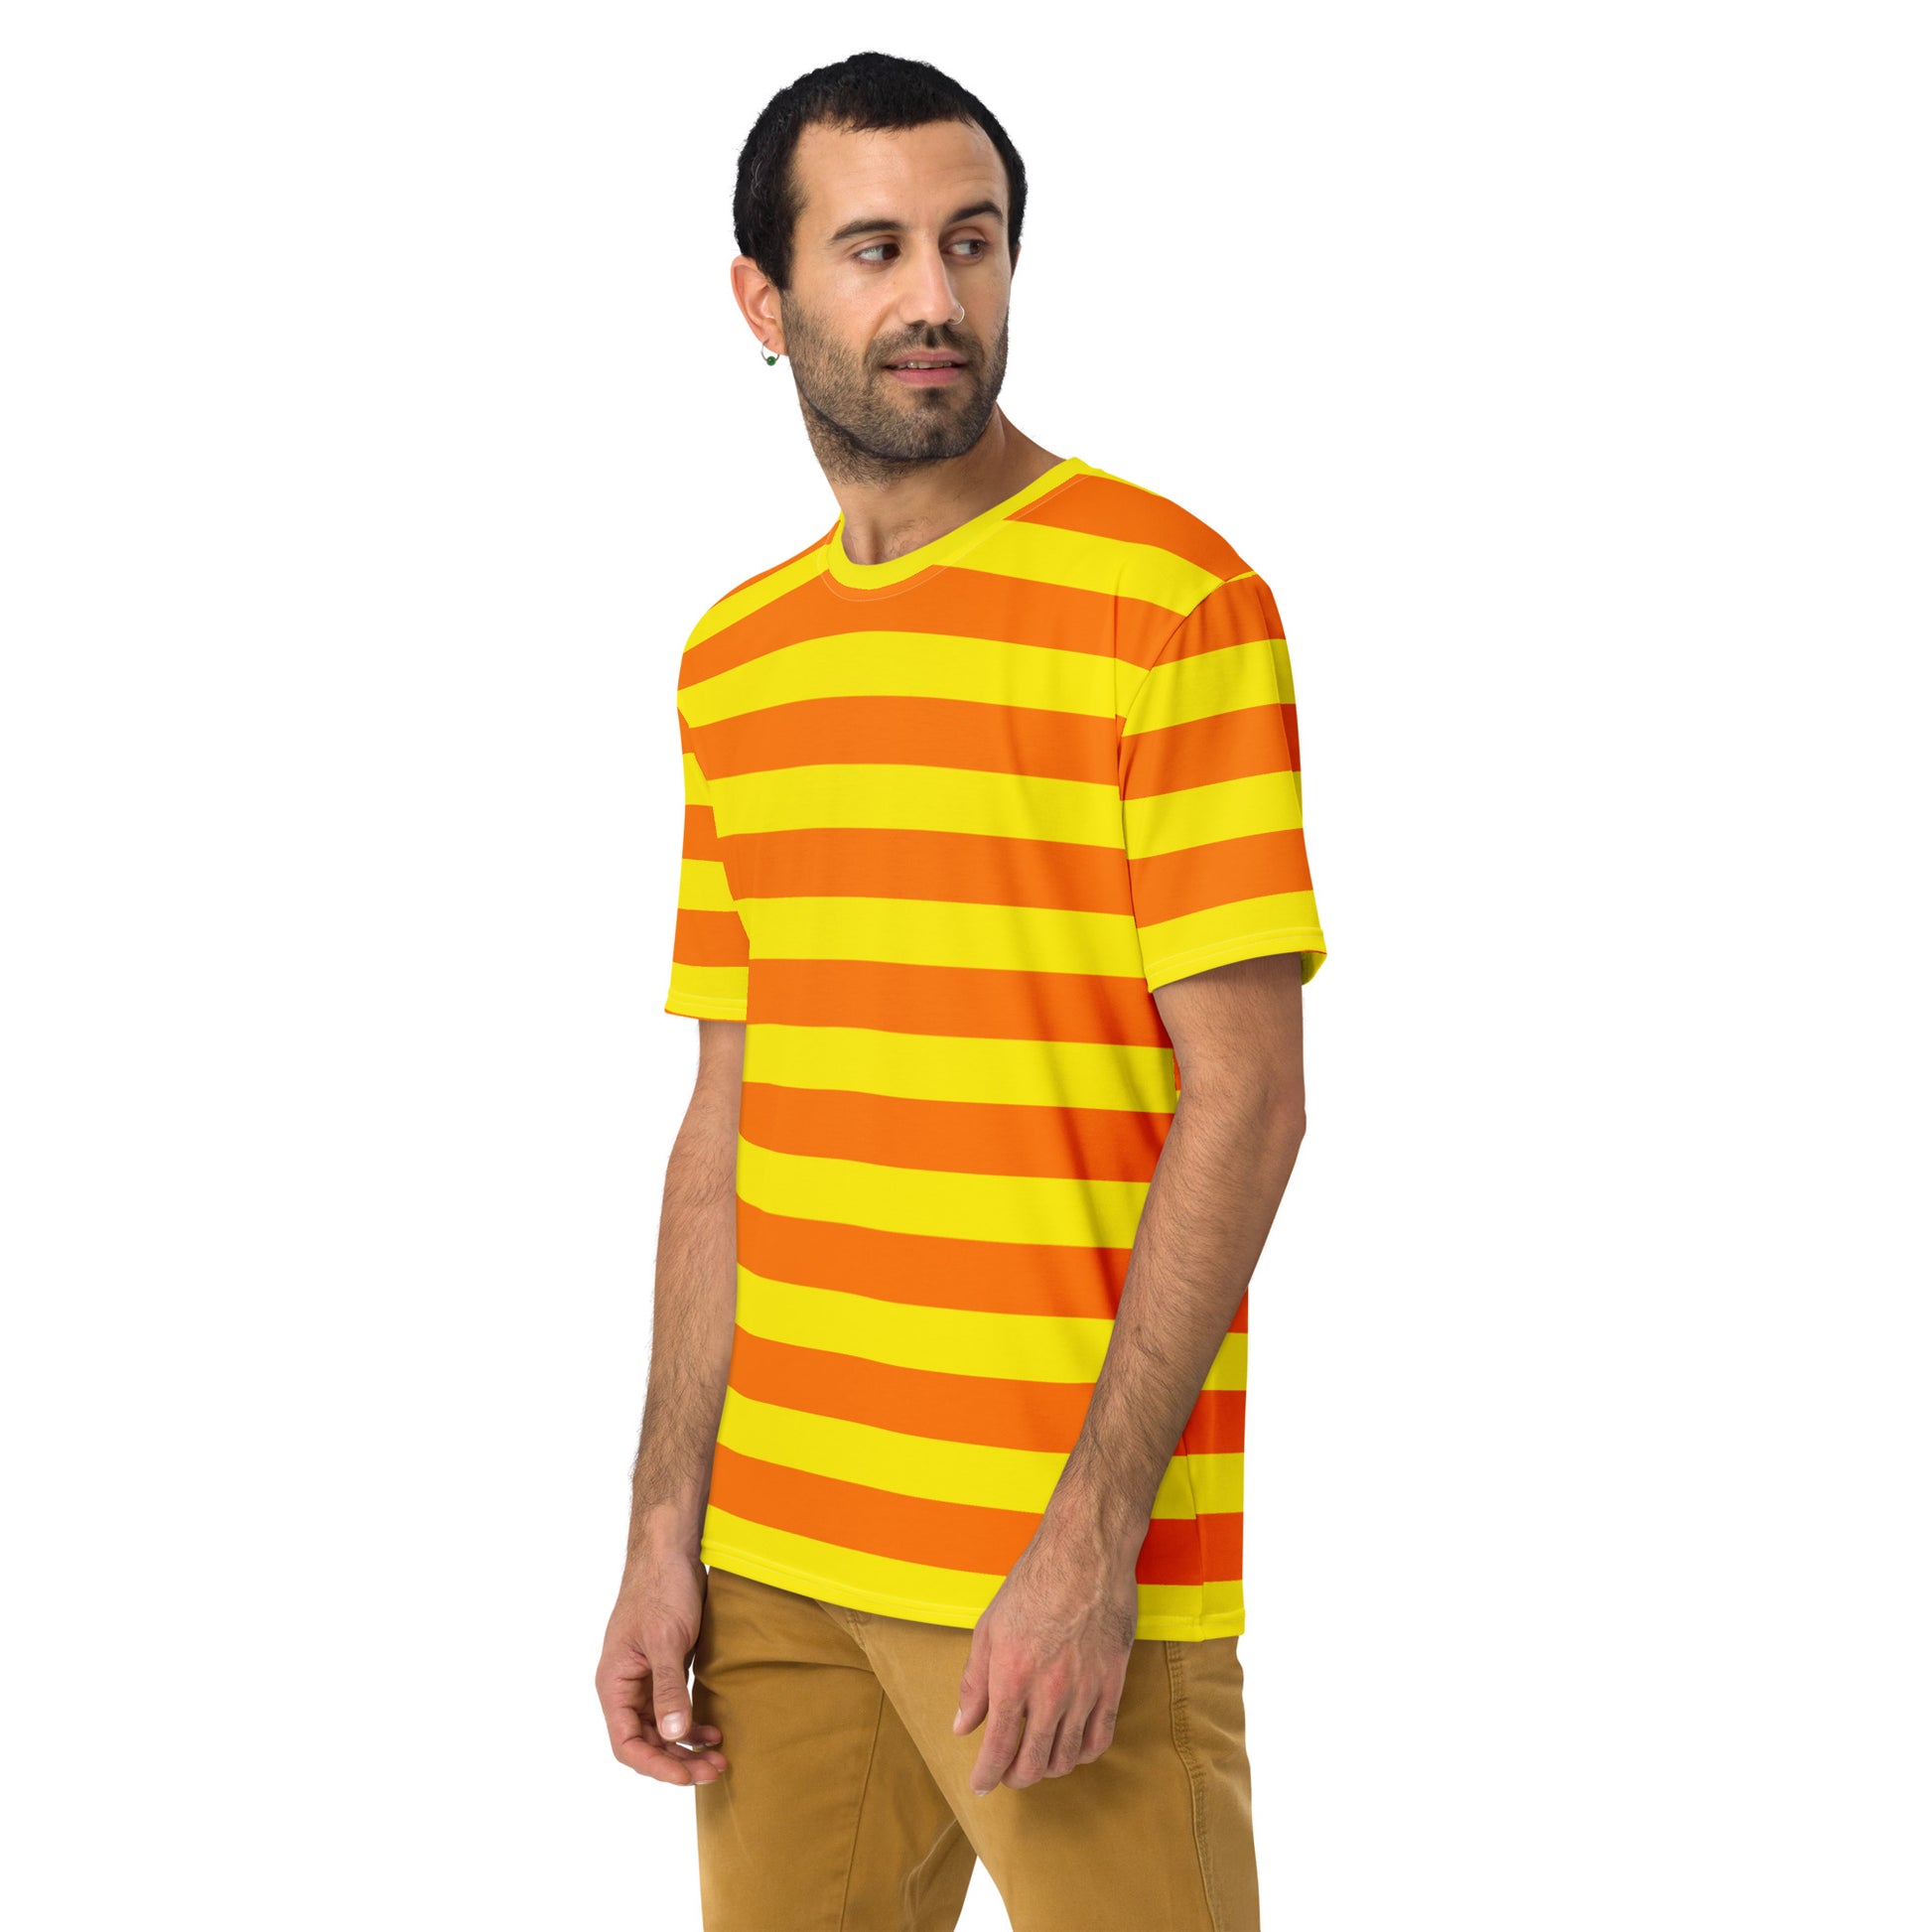 T-shirt with orange and yellow stripes